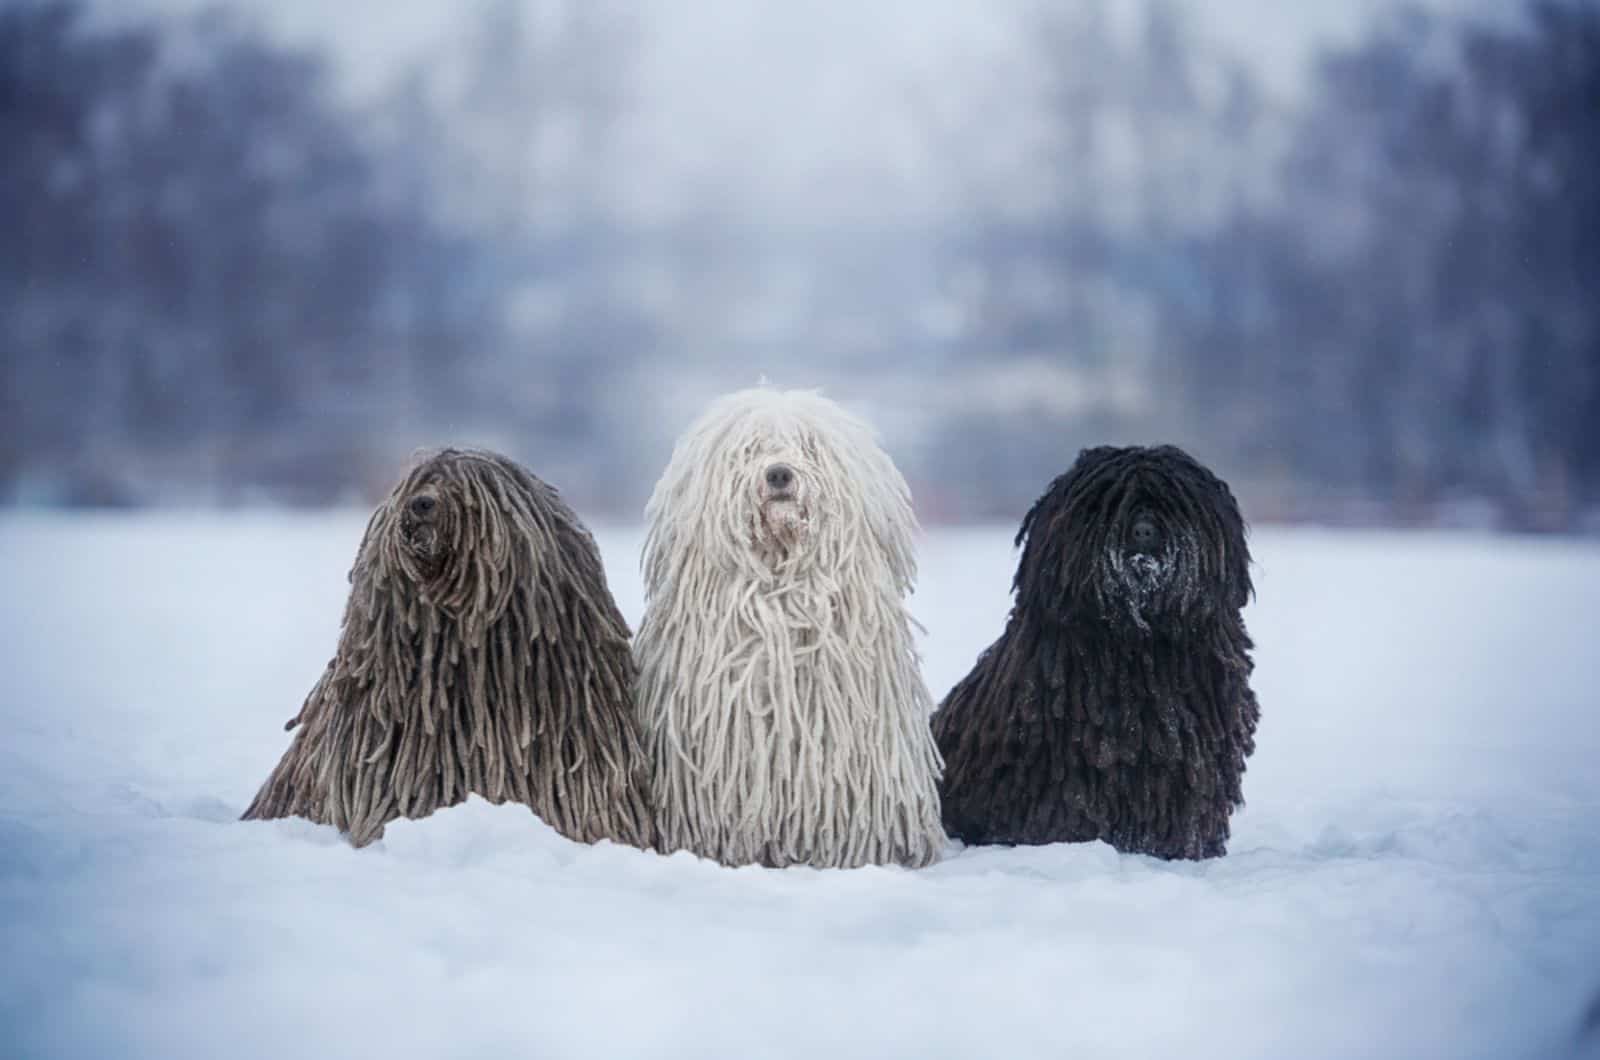 5 Puli Breeders In The U.S. – Find Your Wooly Puli